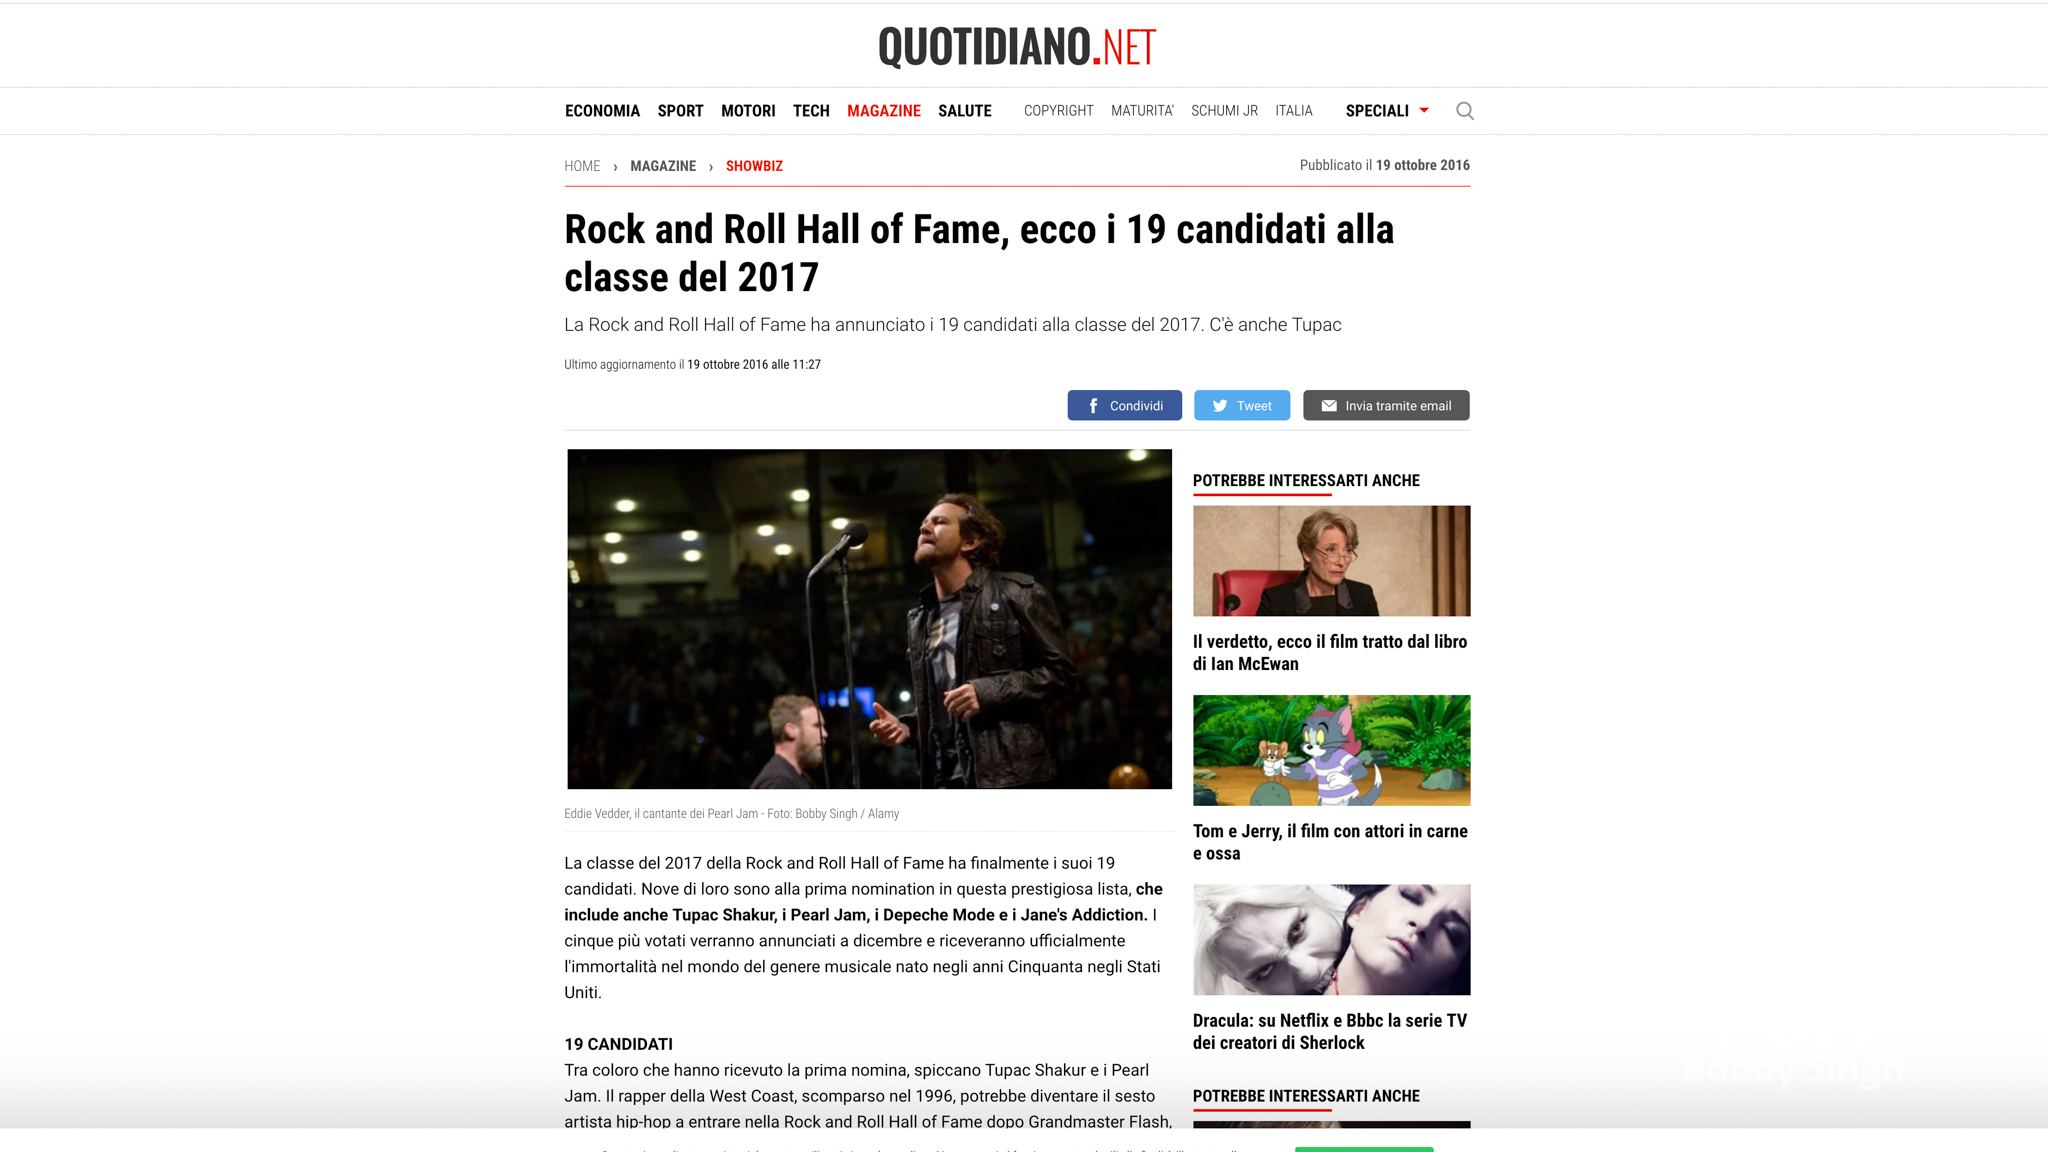 "Pearl Jam".  Quitidiano.net Italy. 10.19.2016